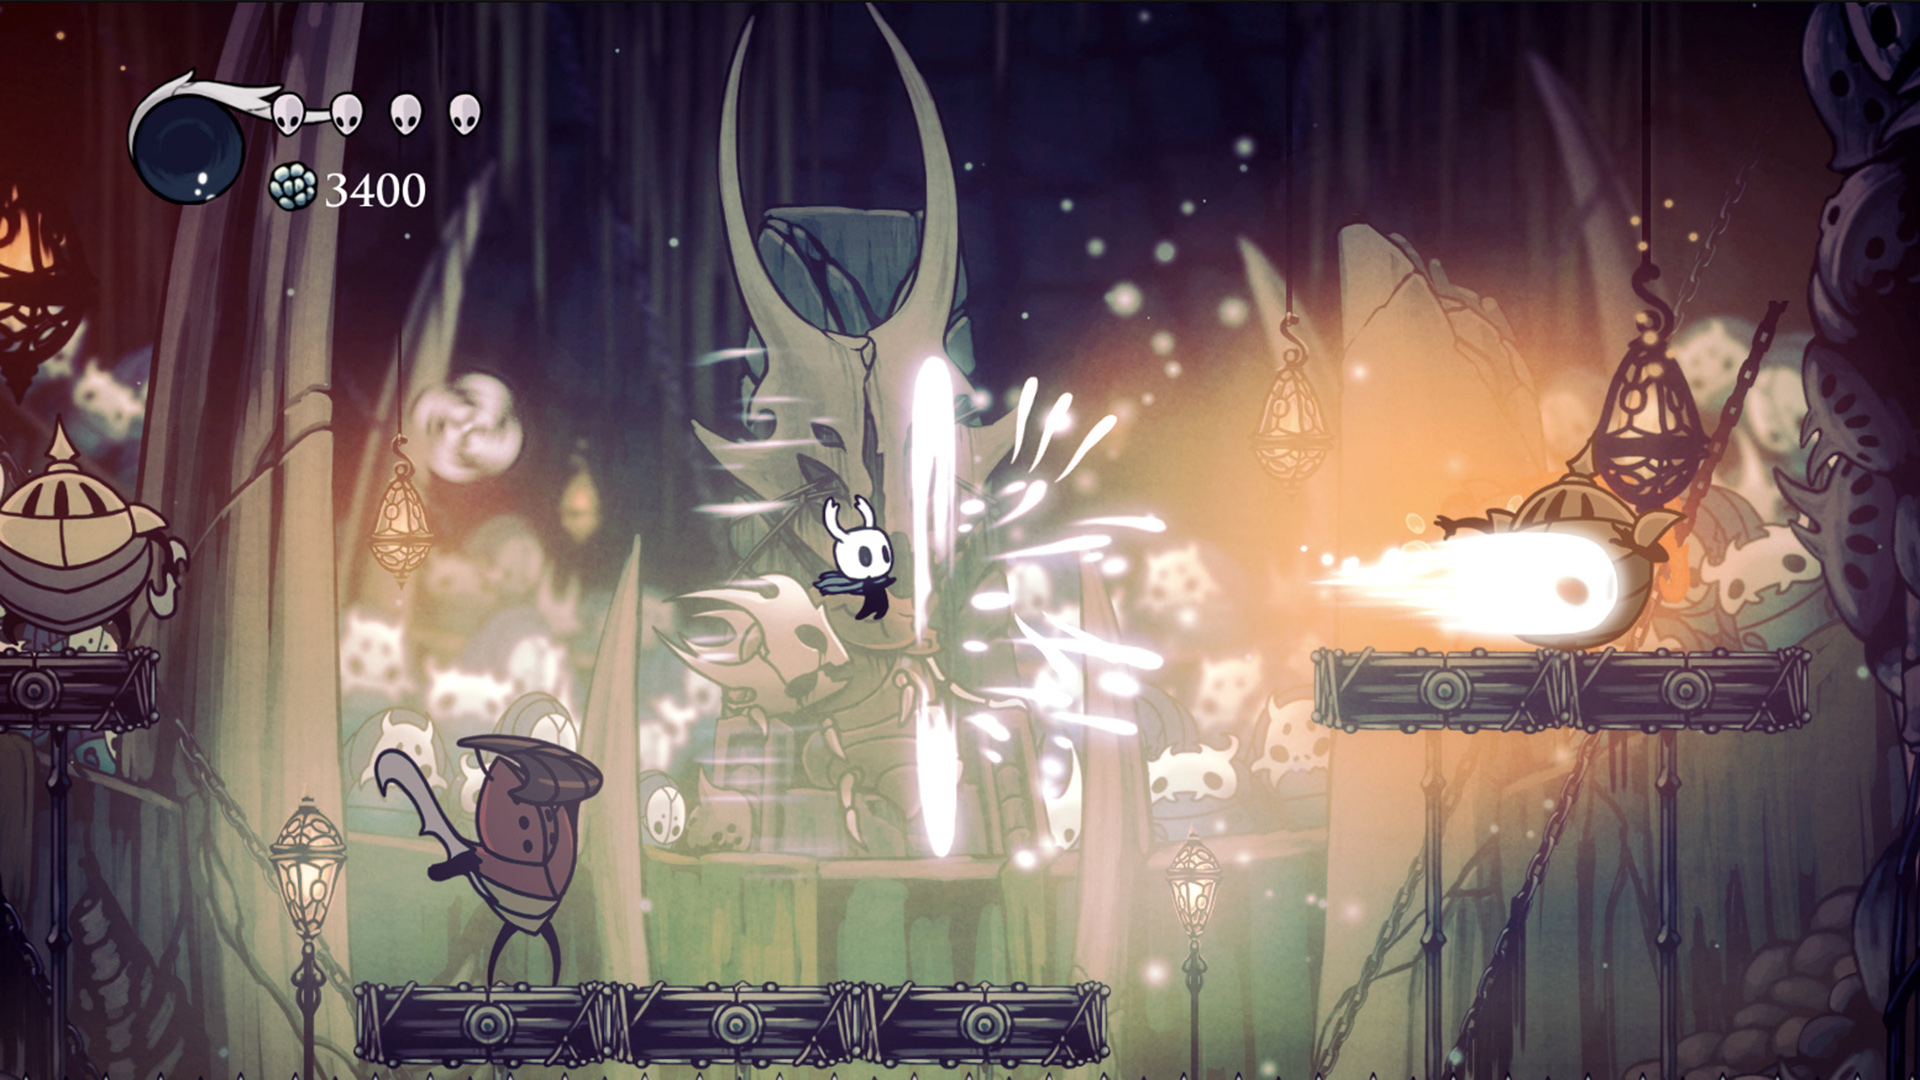 hollow knight download free 2019